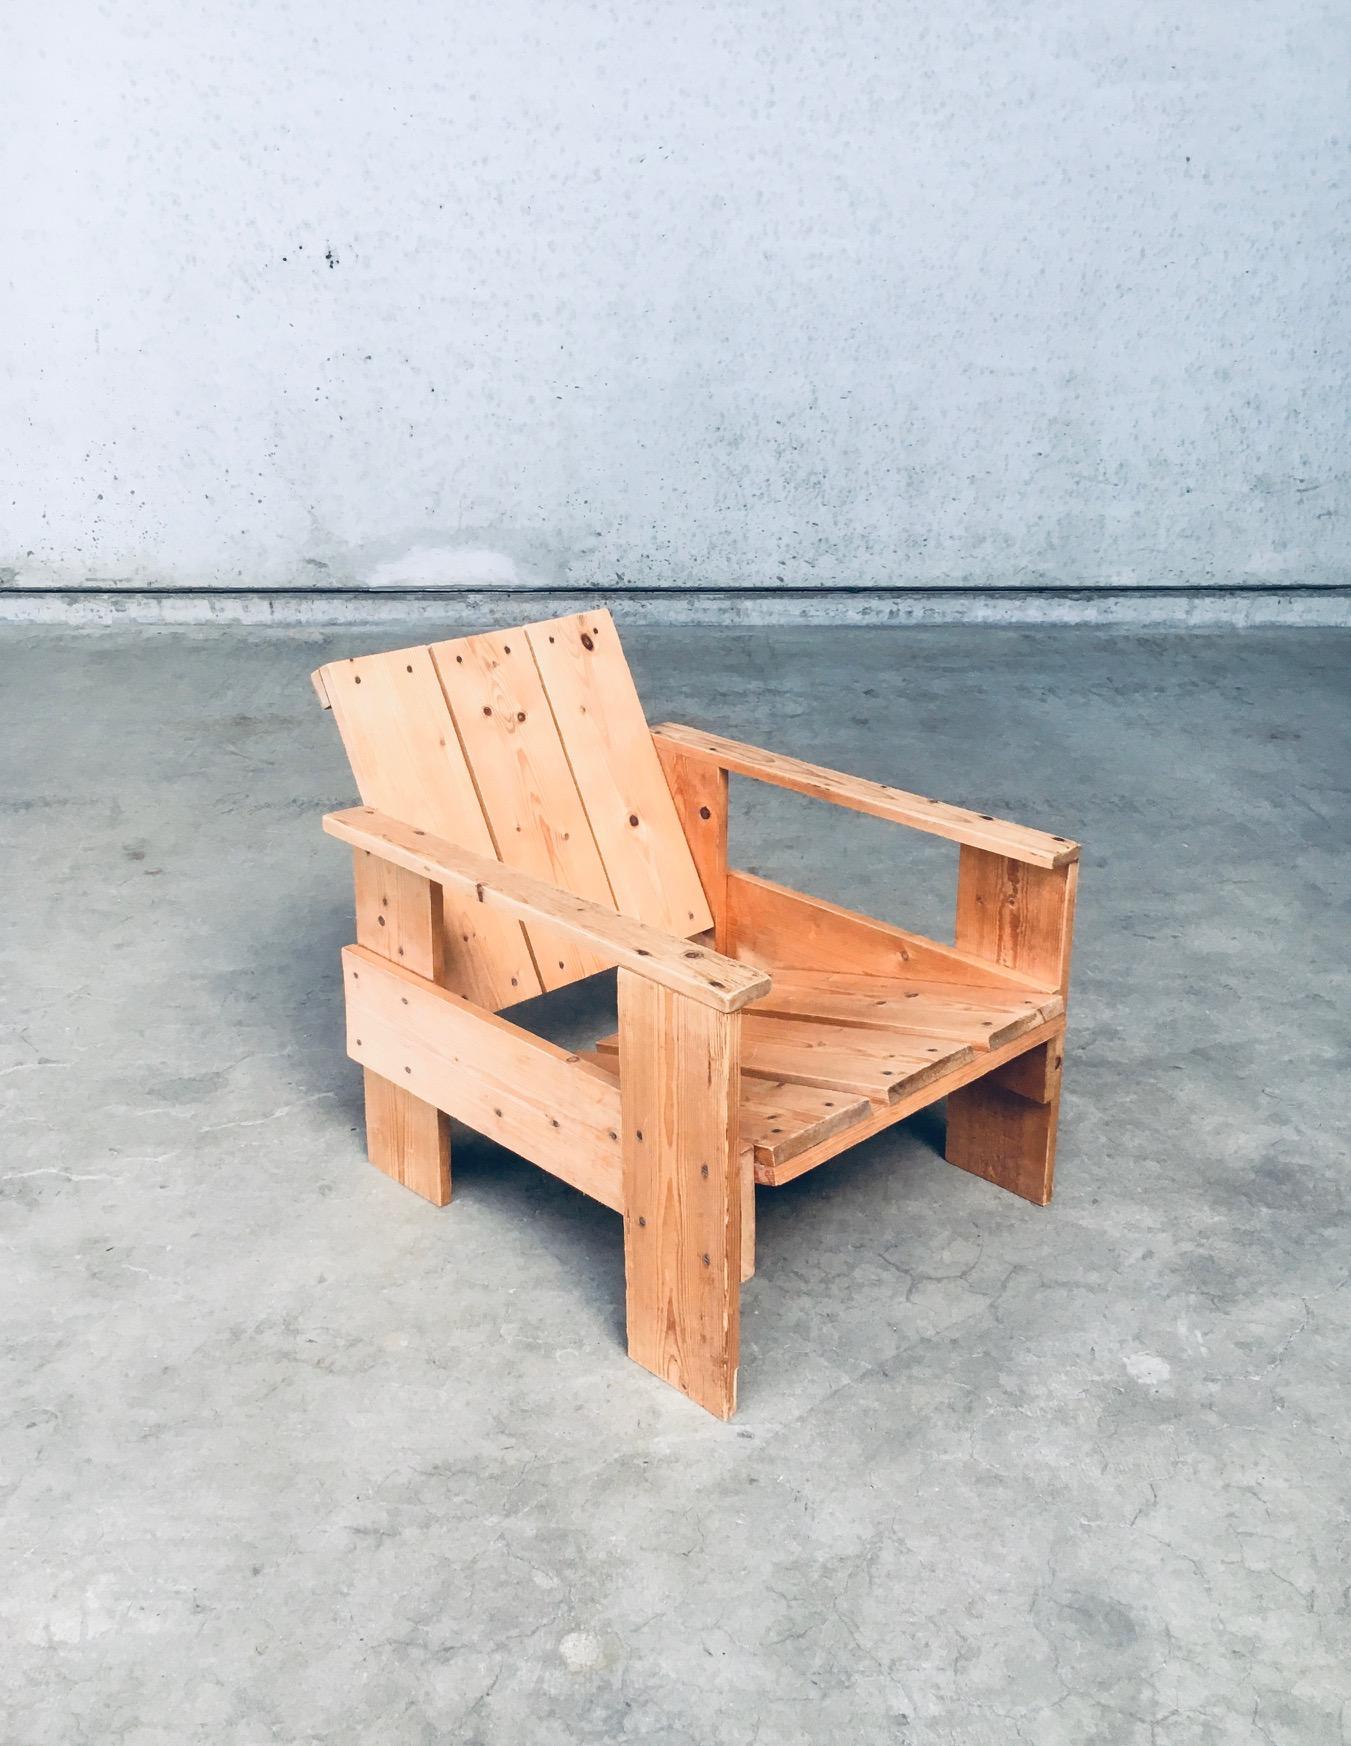 Vintage De Stijl Movement Dutch Design Pine Crate chair by Gerrit Rietveld. Made in the Netherlands, circa 1960. Solid Pine constructed lounge /arm chair. This chair is a testament to Rietveld's avant-garde approach to furniture design. As a